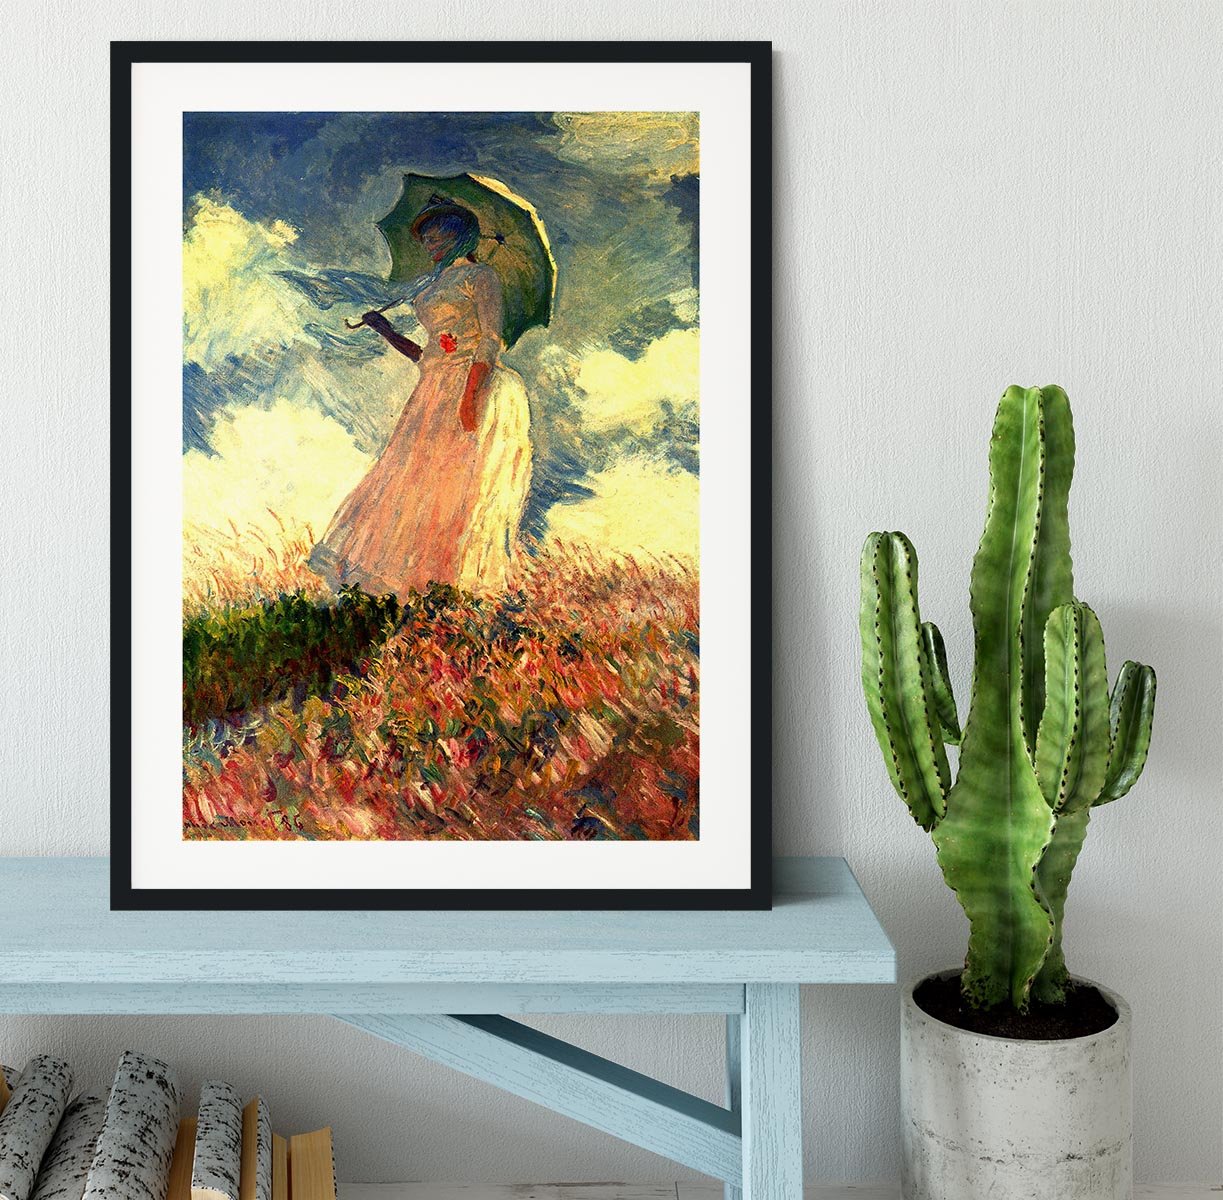 Woman with sunshade by Monet Framed Print - Canvas Art Rocks - 1